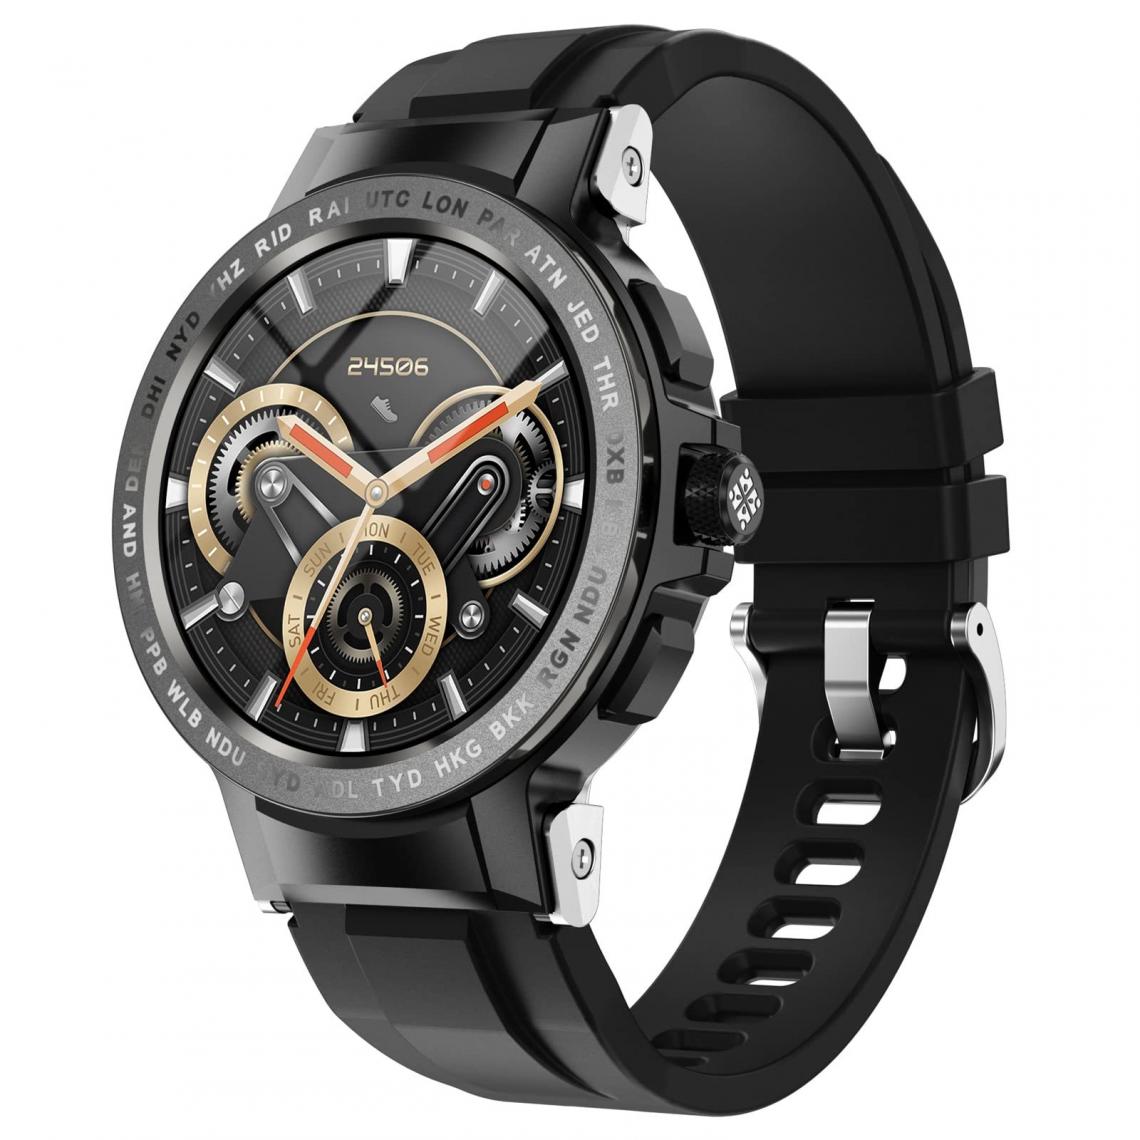 Chronotech Montres - Chronus Smart Watch for Men, Fitness Tracker with 24 Exercise Modes,1.28 inch DIY Touch Screen Heart Rate Sleep Monitor Message Notification, IP68 Waterproof Step Counter Activity Trackers for iOS Android(black) - Montre connectée